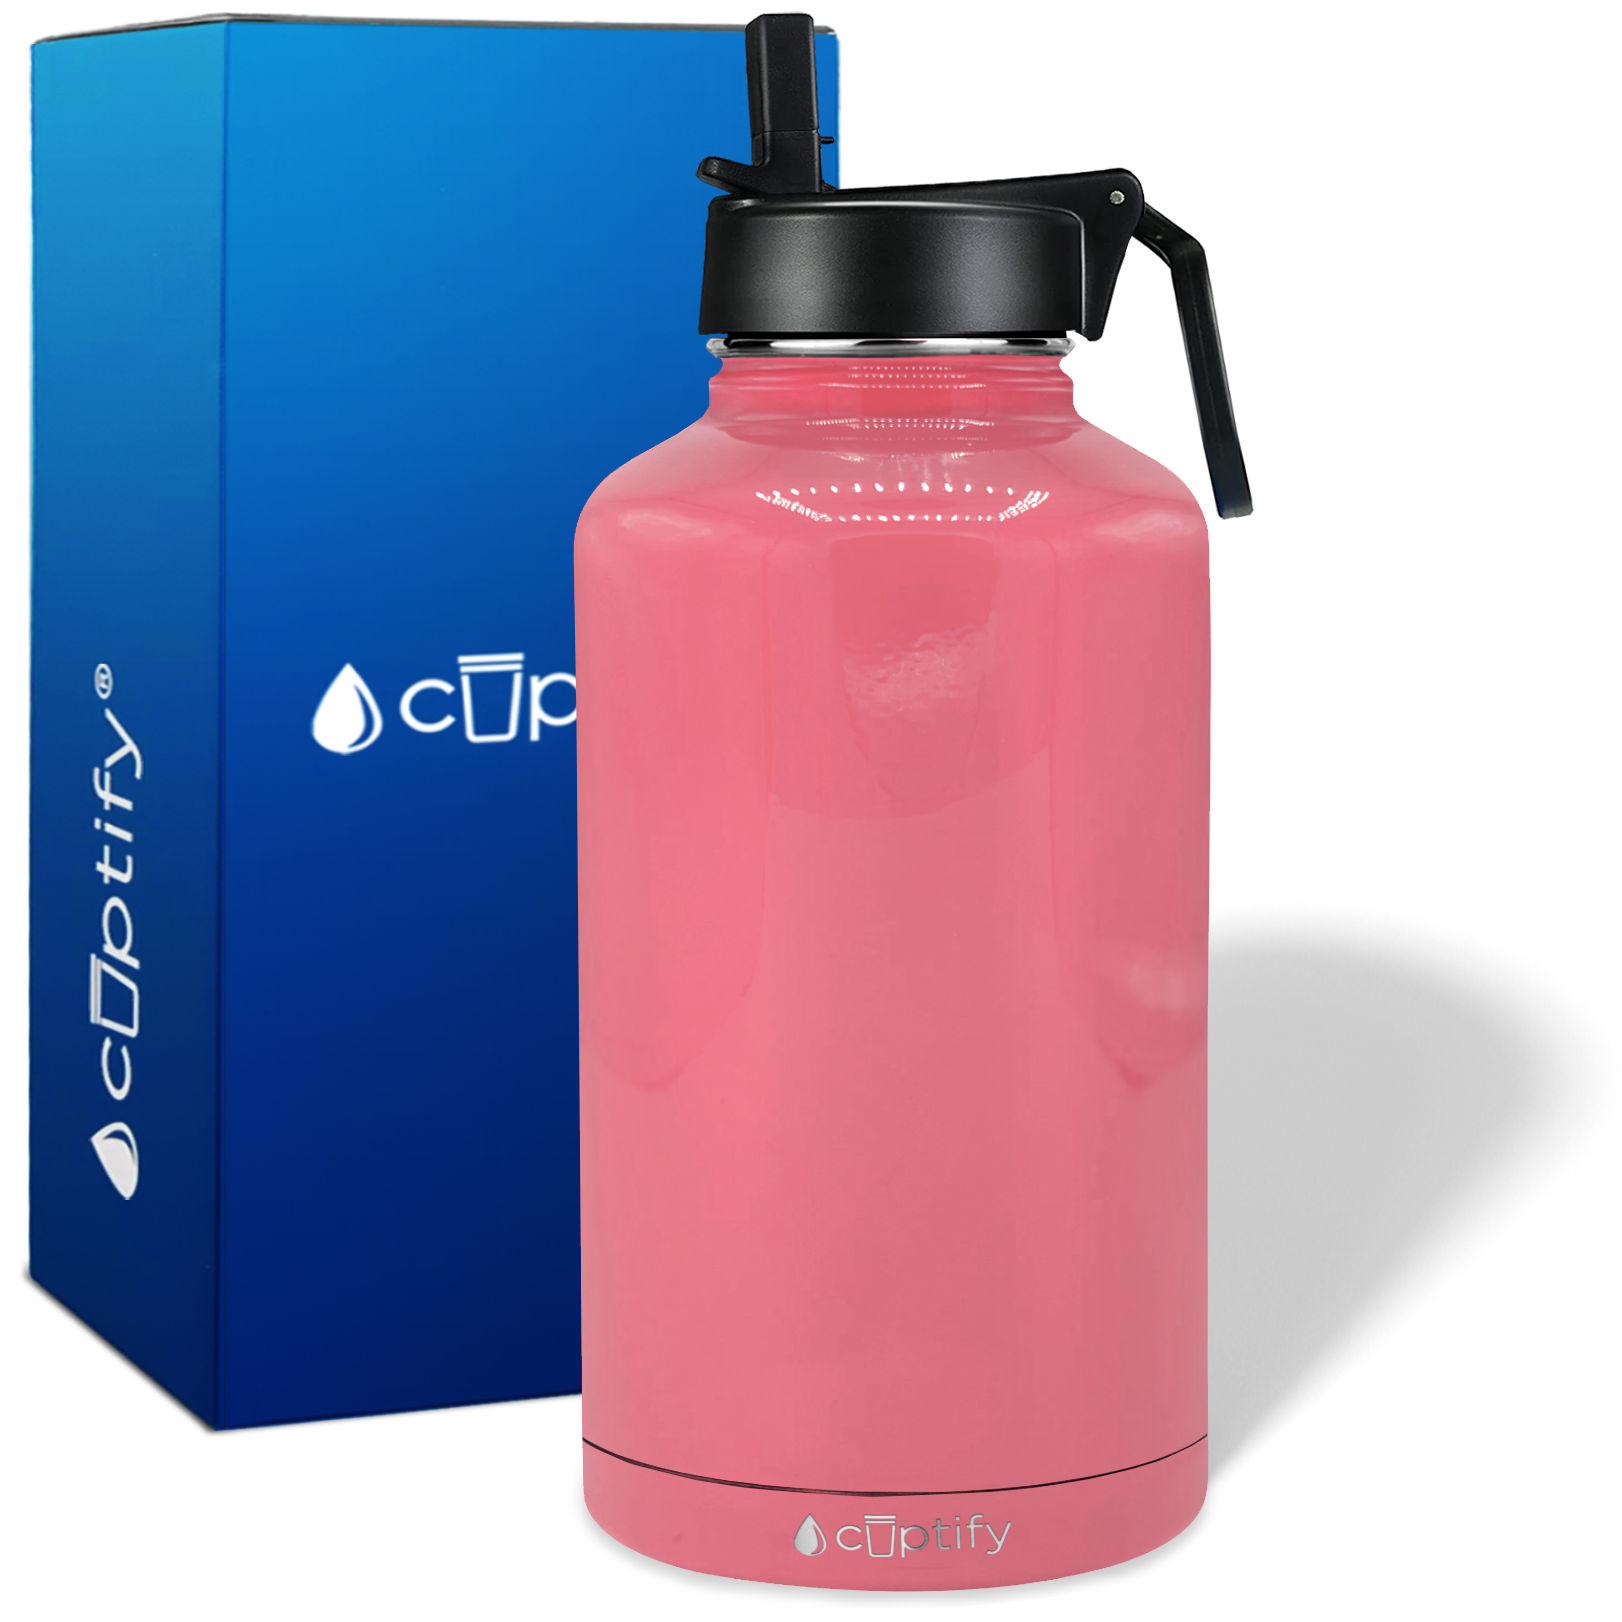 Hot Pink Gloss 32oz Wide Mouth Water Bottle - Cuptify